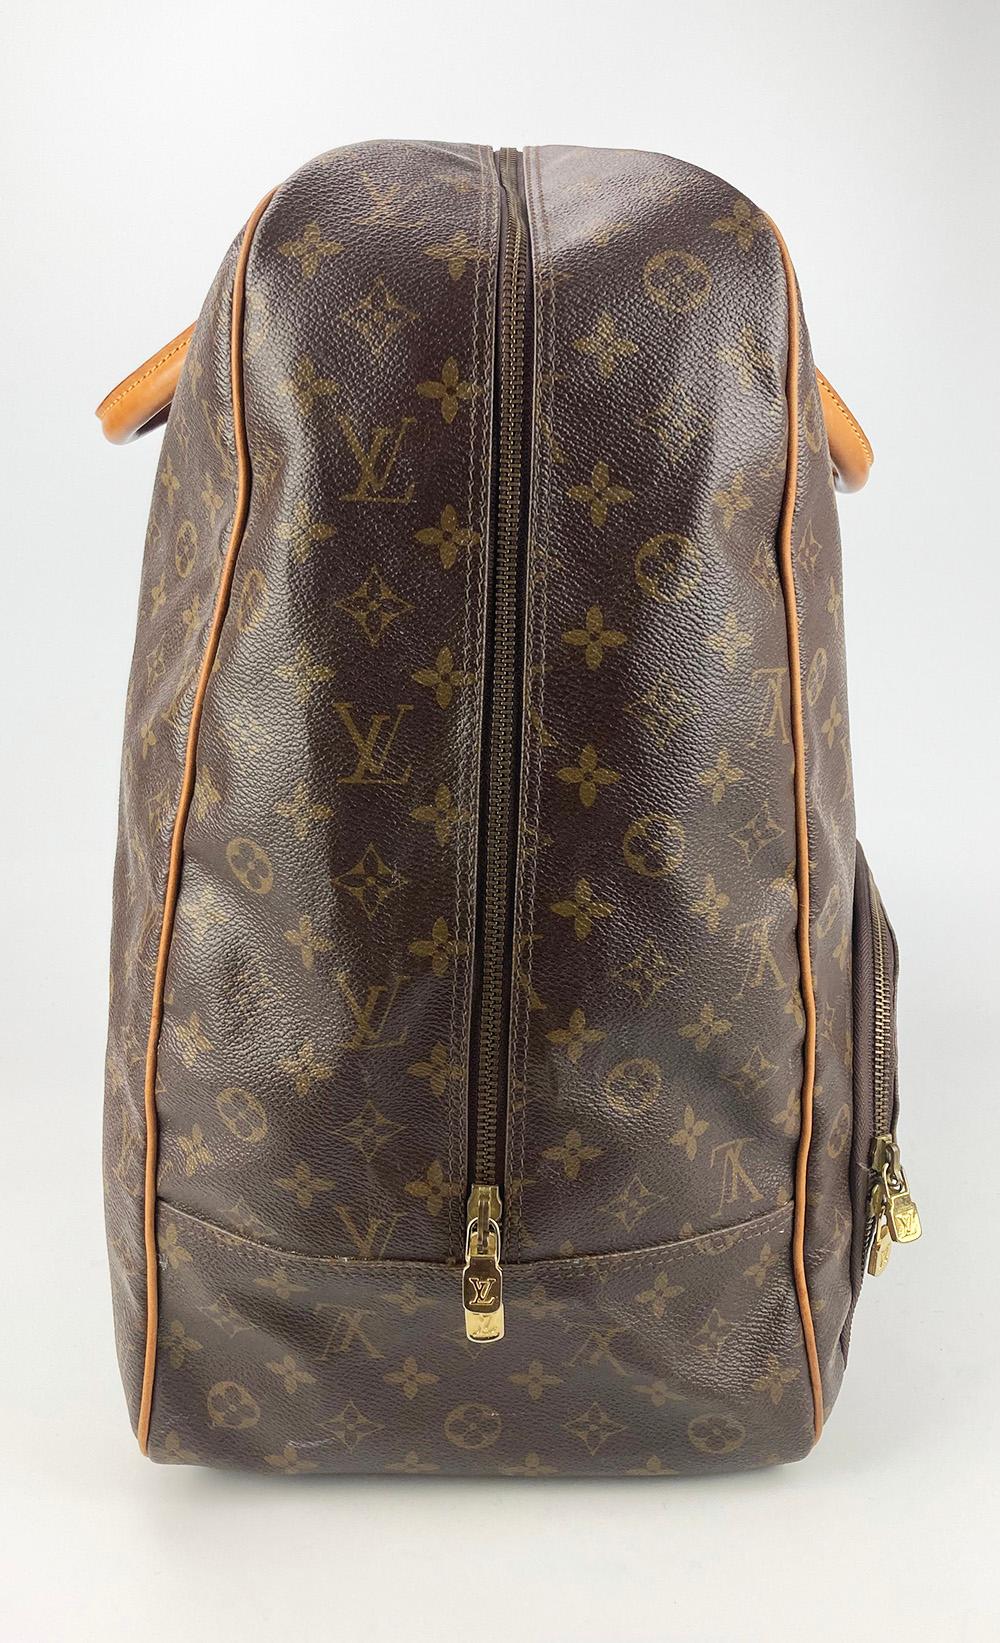 Vintage Louis Vuitton Monogram Evasion GM Sports Tote in good condition. rare Vintage design no longer made or sold in stores. Signature monogram canvas exterior trimmed with tan leather and brass hardware. Front exterior deep zip pocket with brown